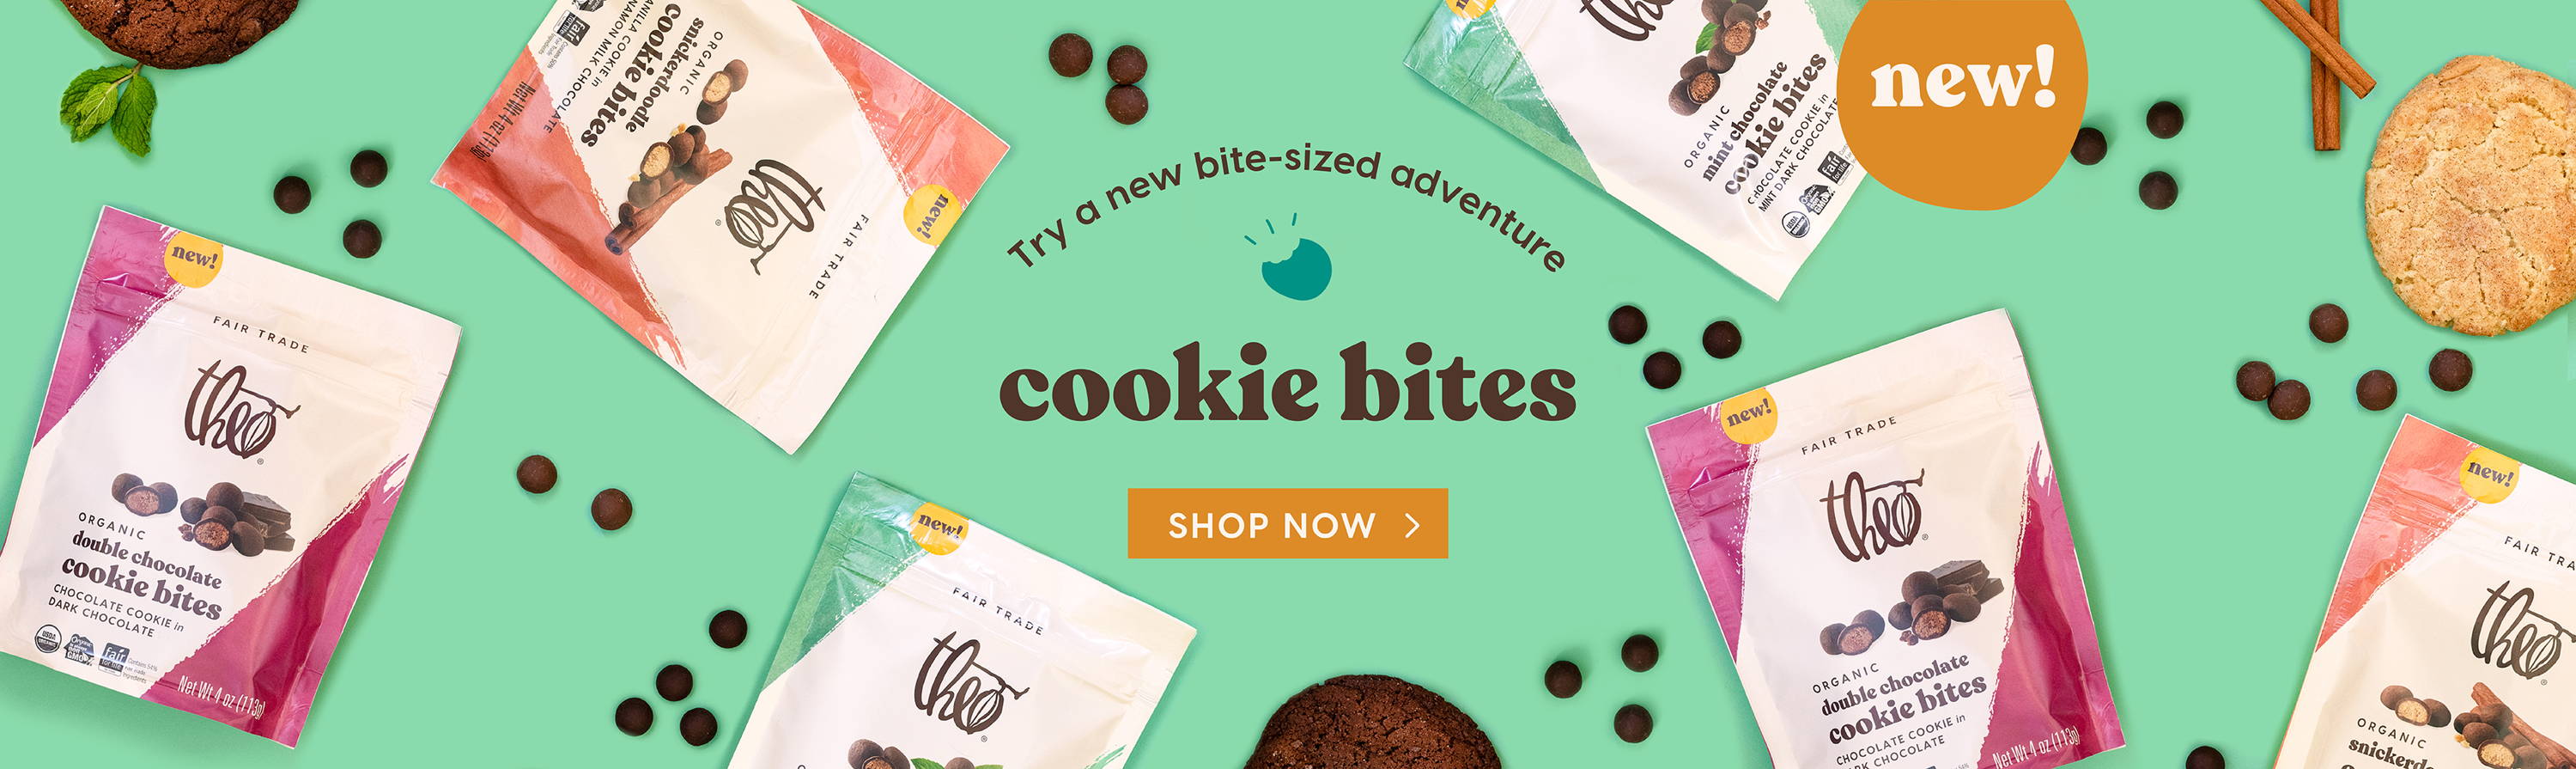 Cookie Bites, Try a new bite-sized adventure